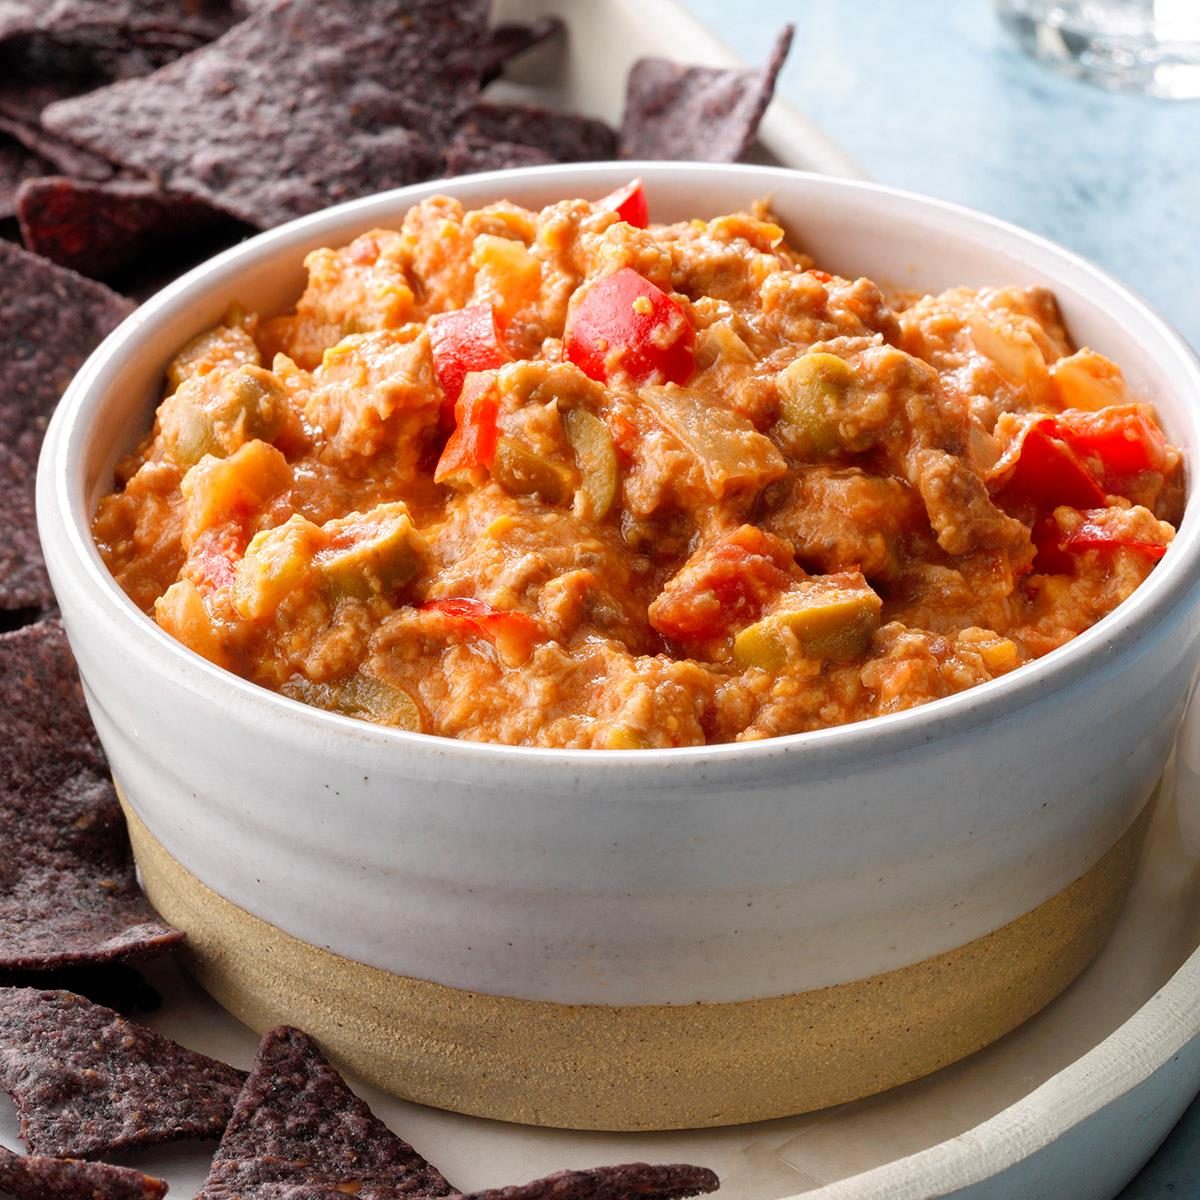 40 Crockpot Dip Recipes for Your Next Party